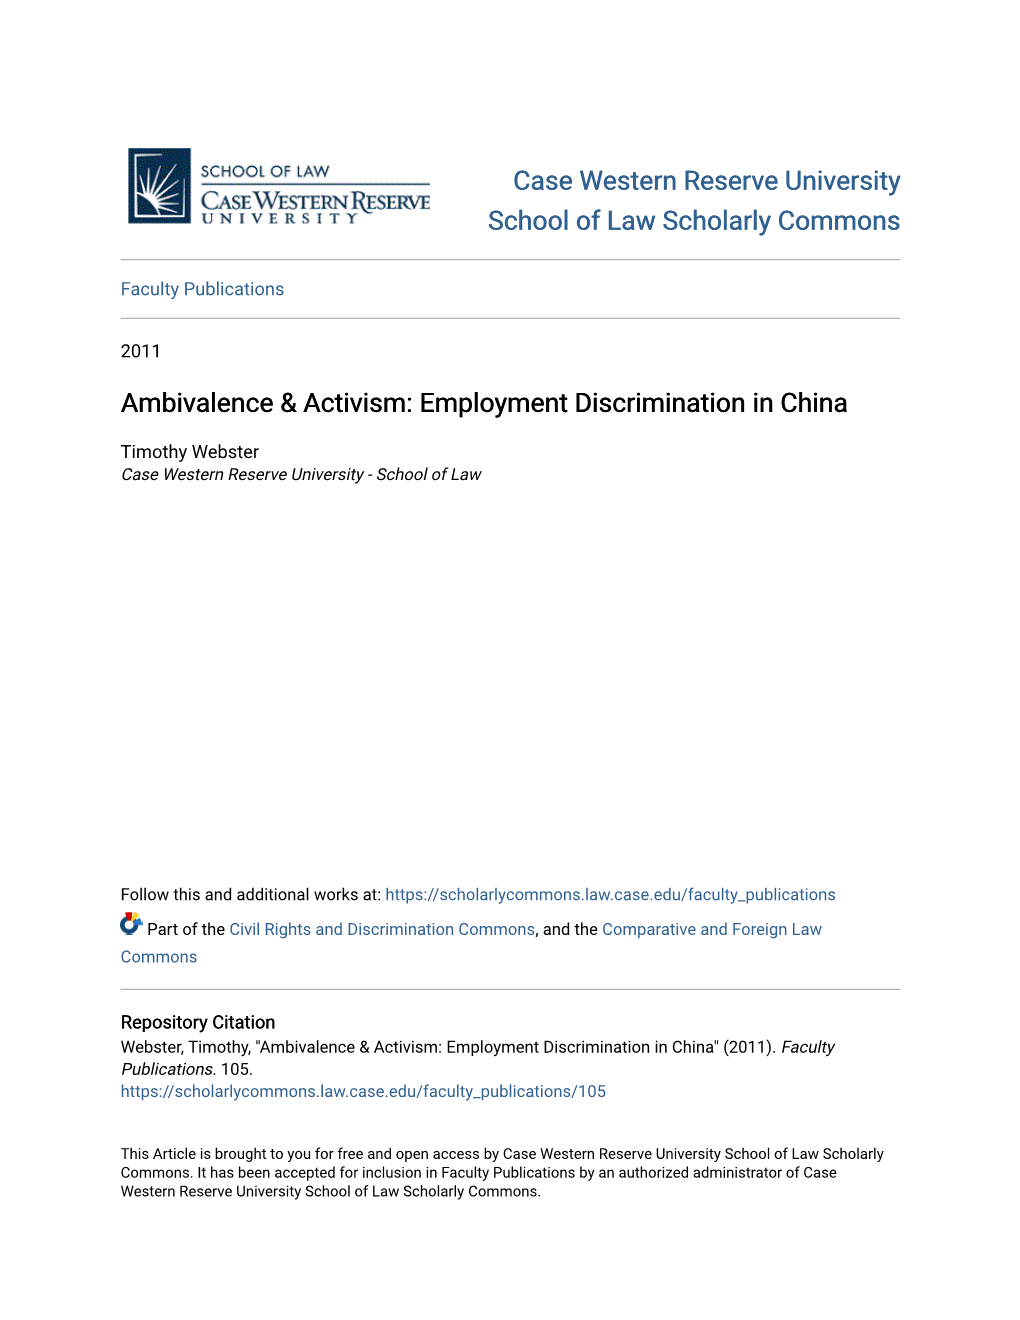 Employment Discrimination in China